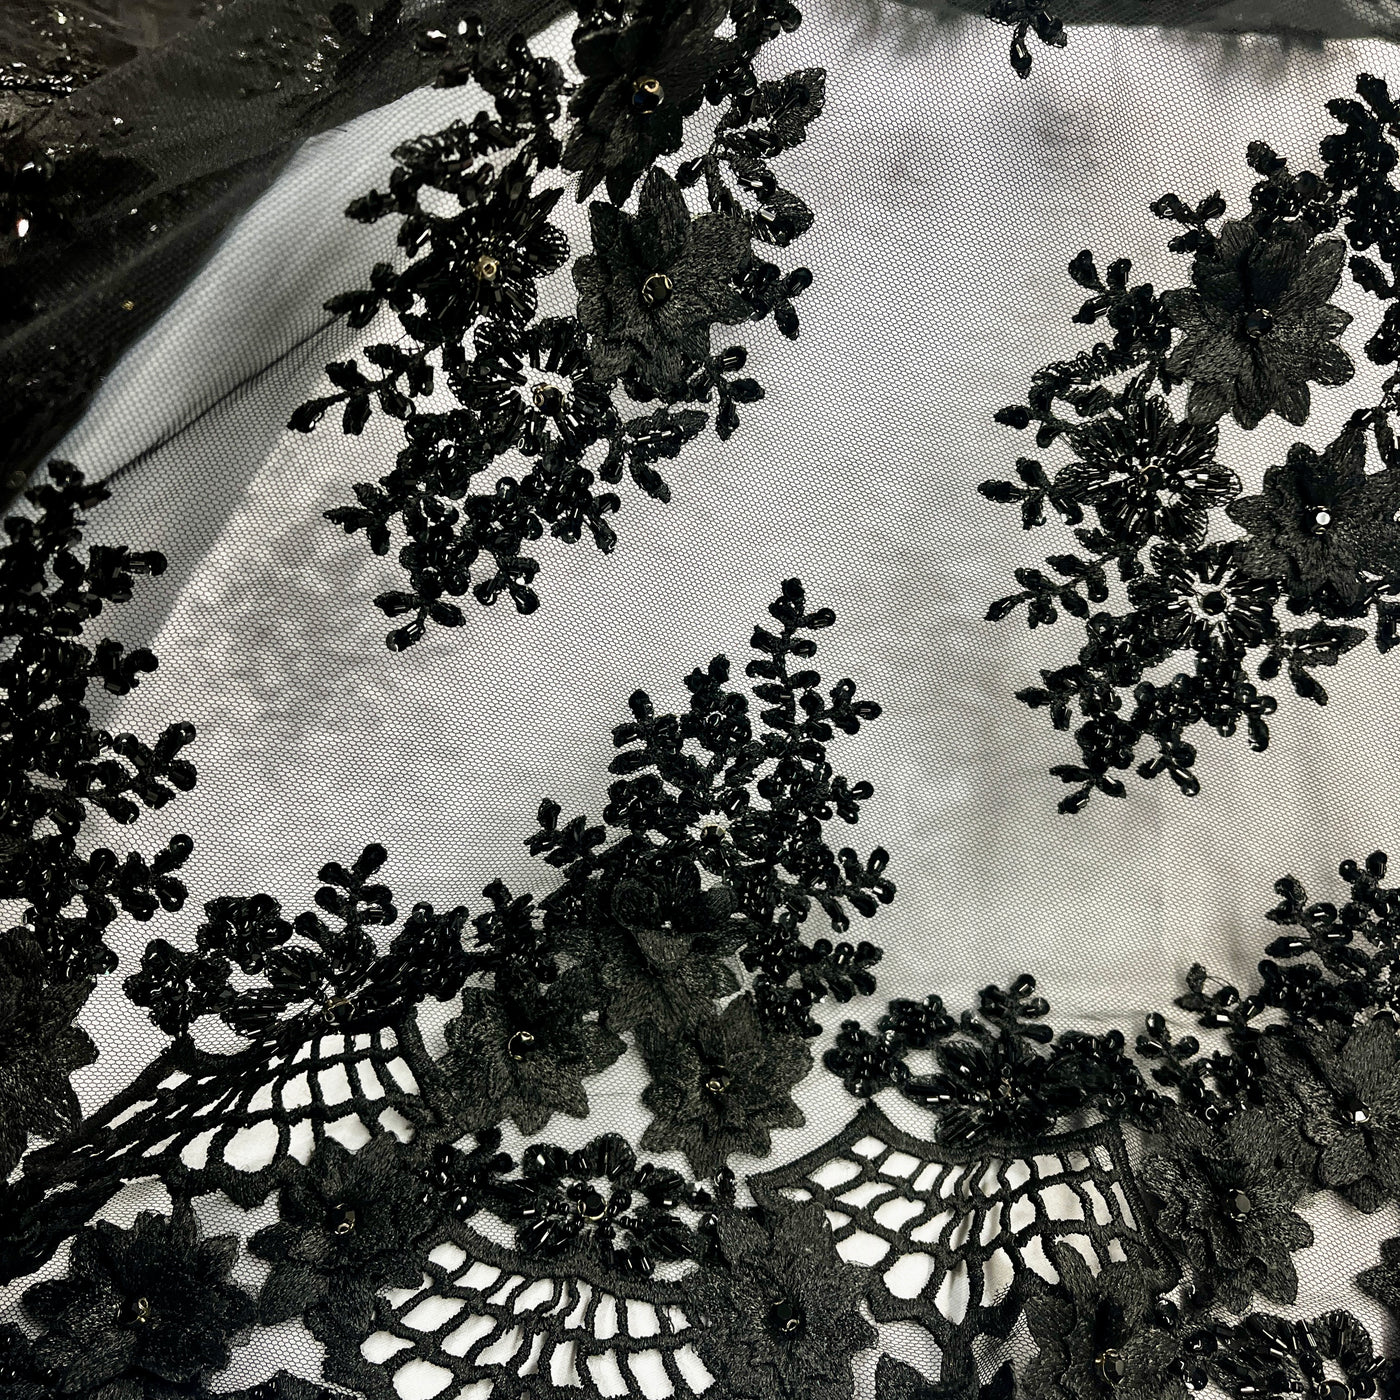 3D Floral Embroidered Net Fabric with Beads & Rhinestones, Sold by the yard. Lace Usa